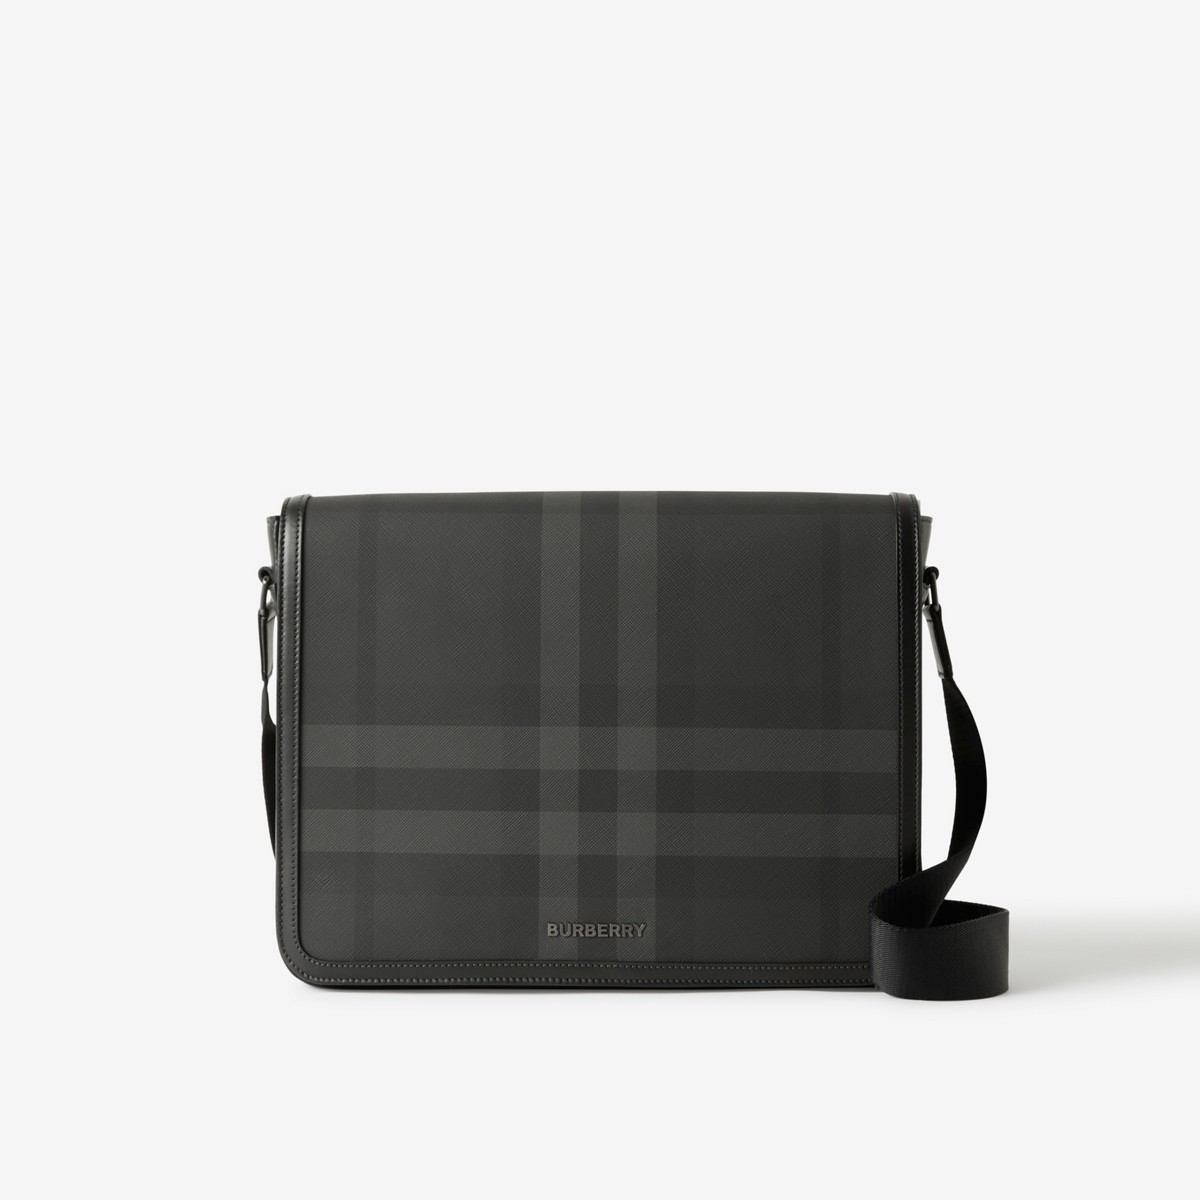 Burberry Medium Alfred Messenger Bag In Charcoal